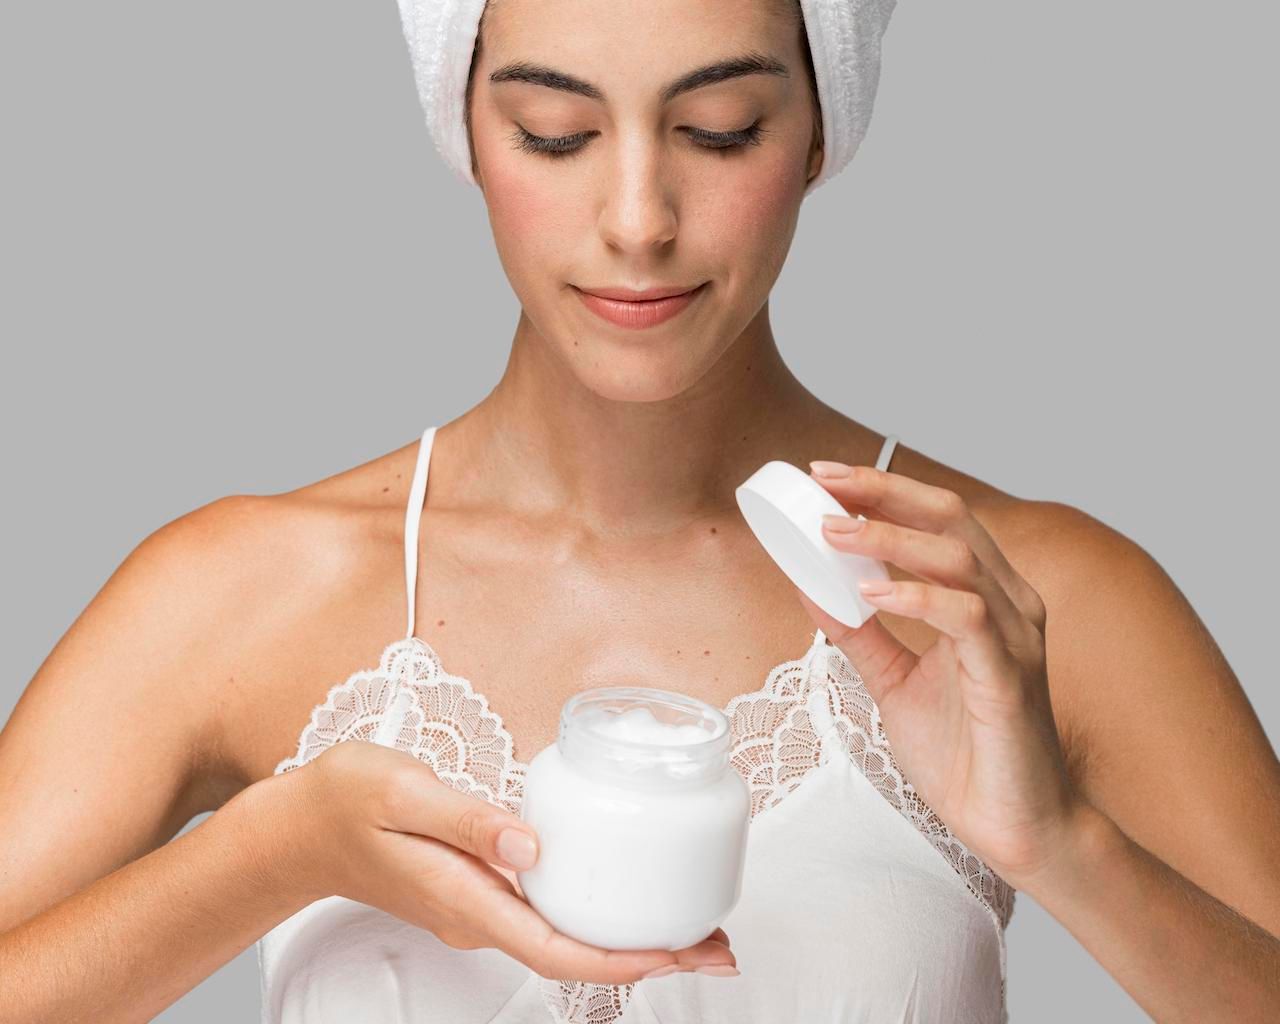 front-view-lady-holding-open-container-cream.jpg